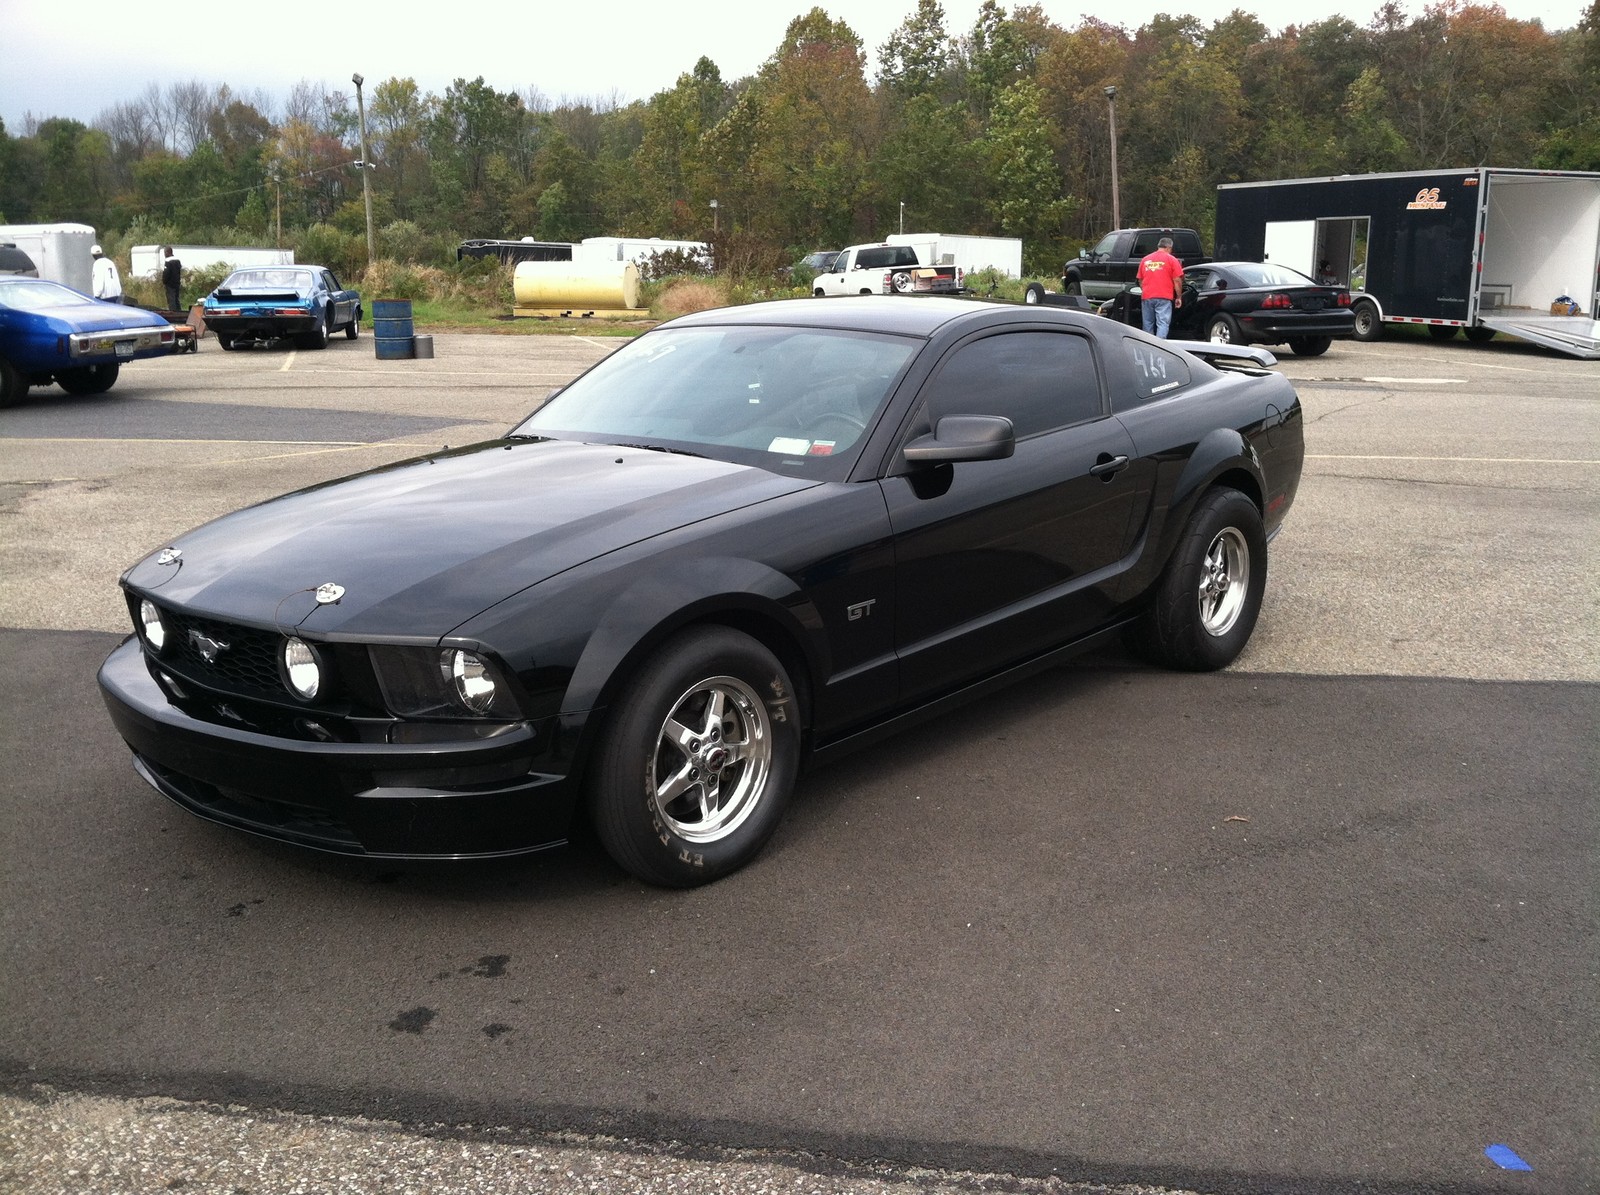 2006 Ford mustang gt quarter mile time #5